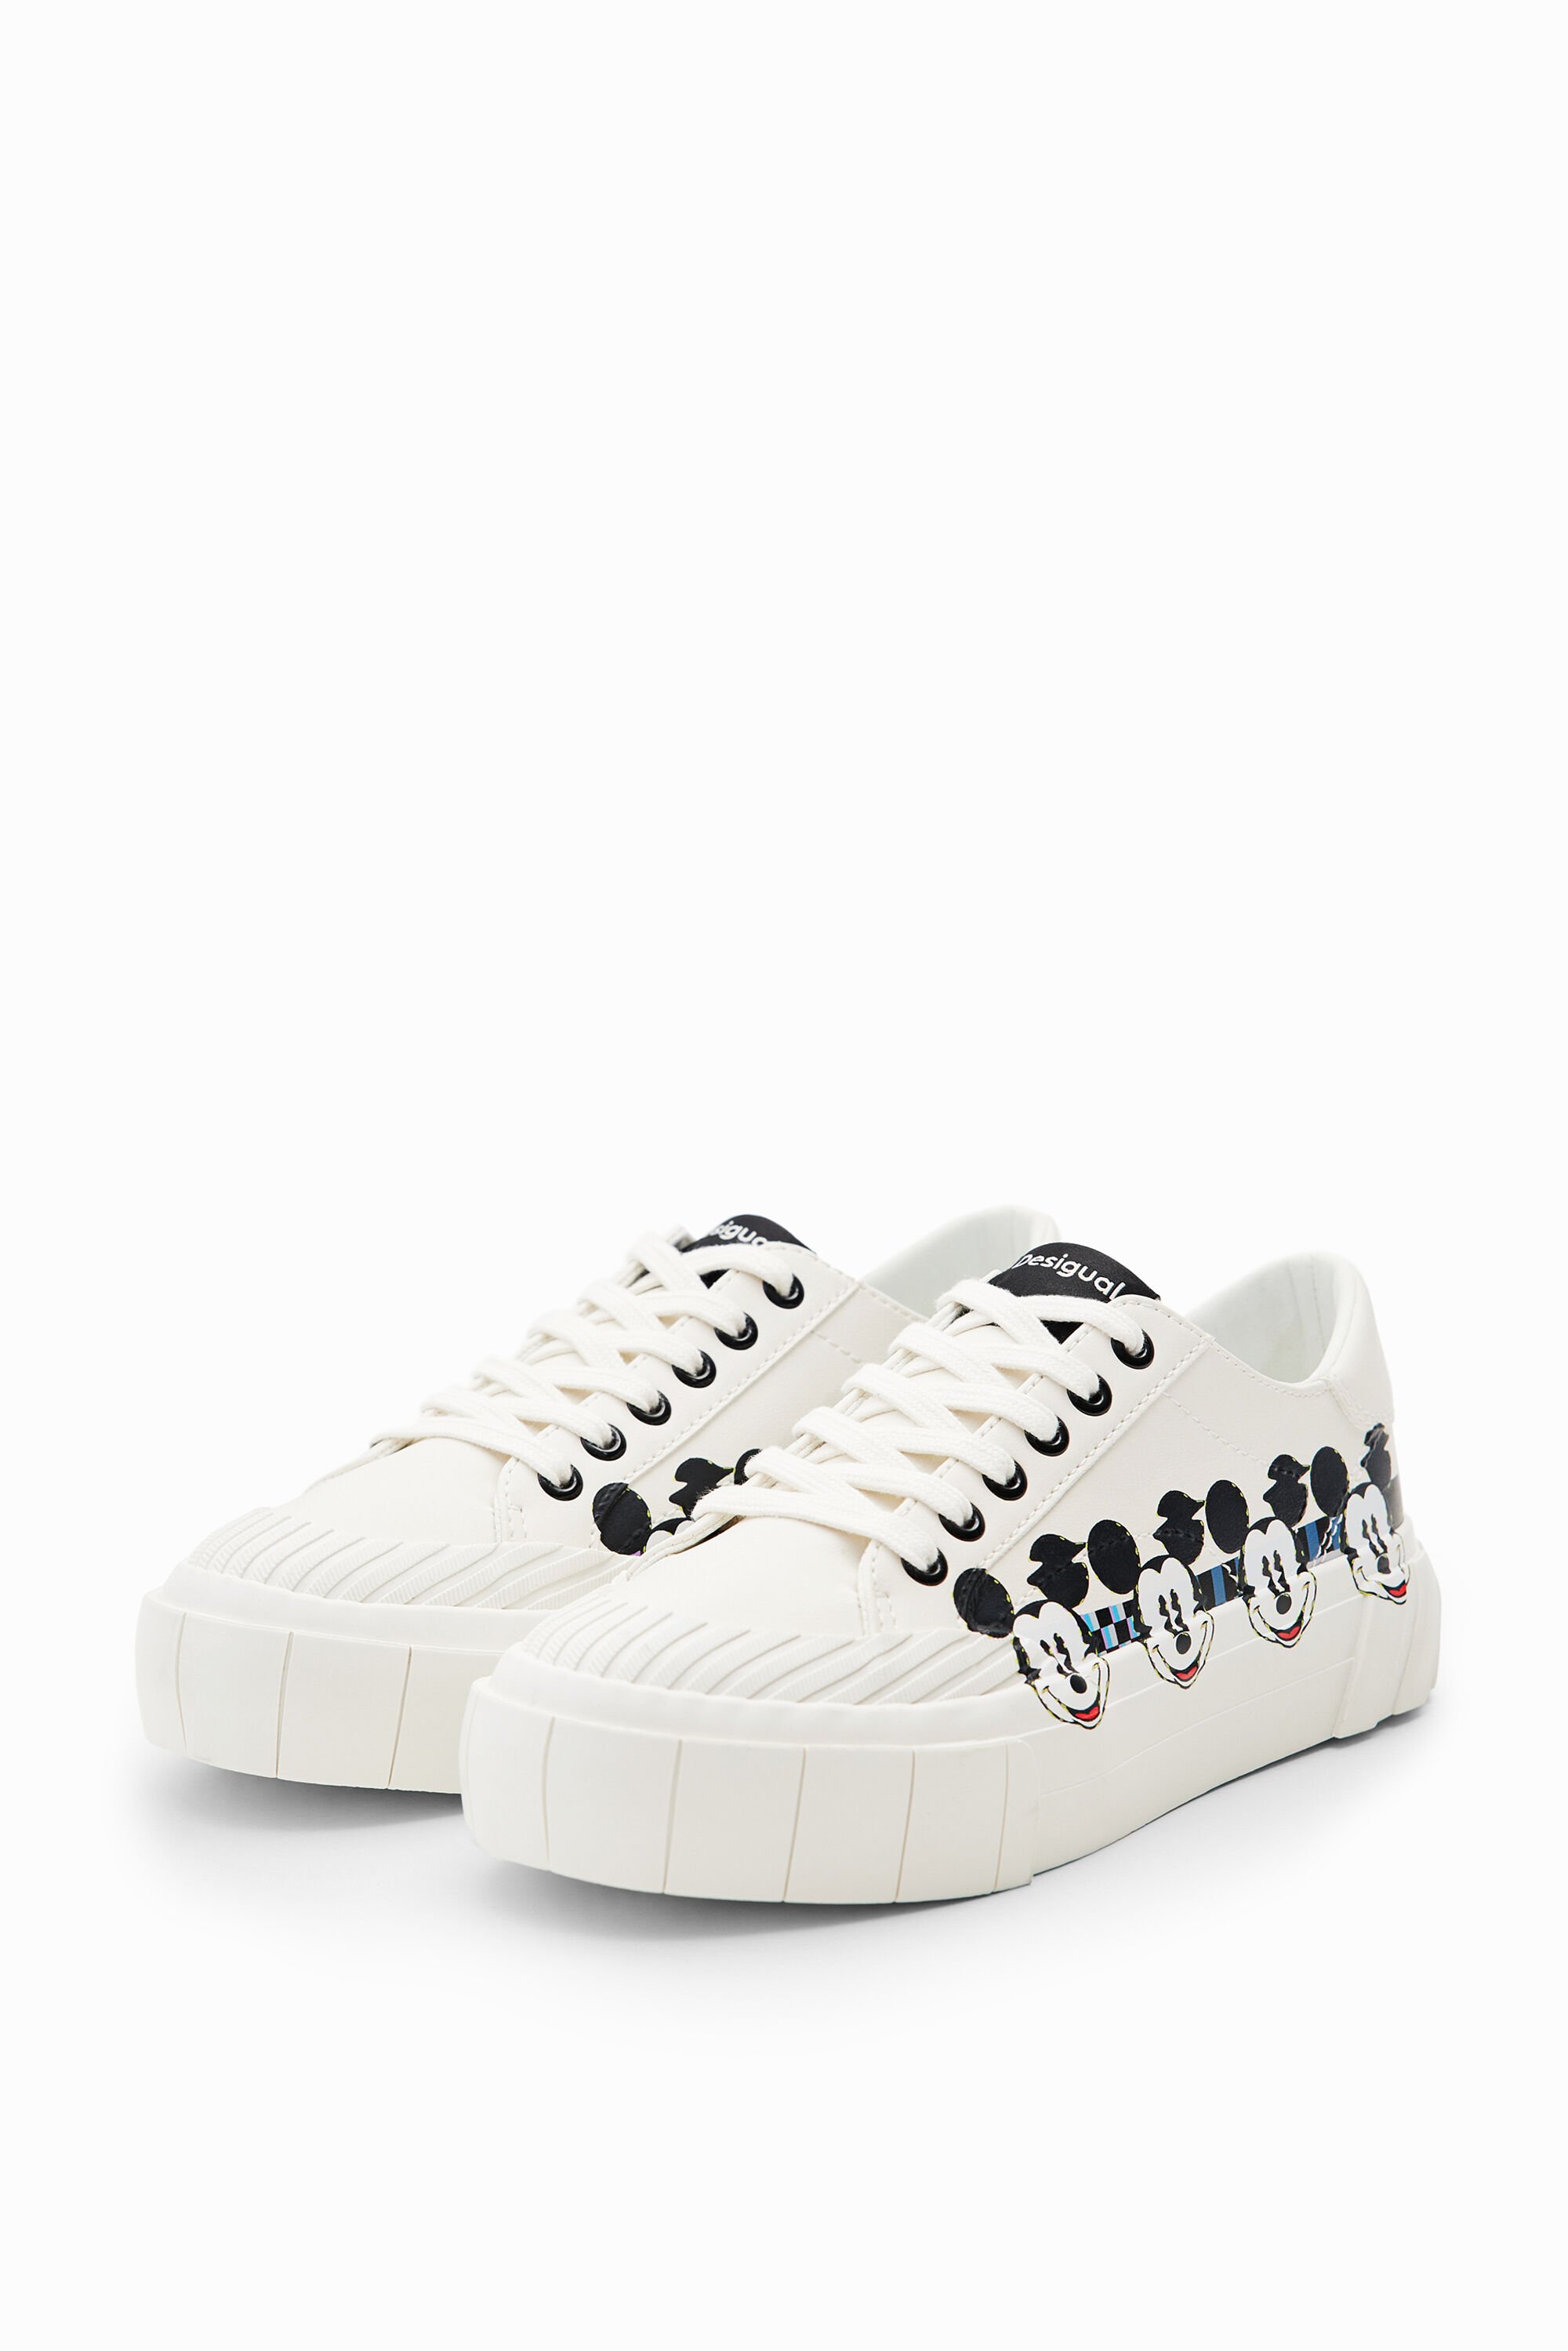 Mickey Mouse platform sneakers - WHITE - 39